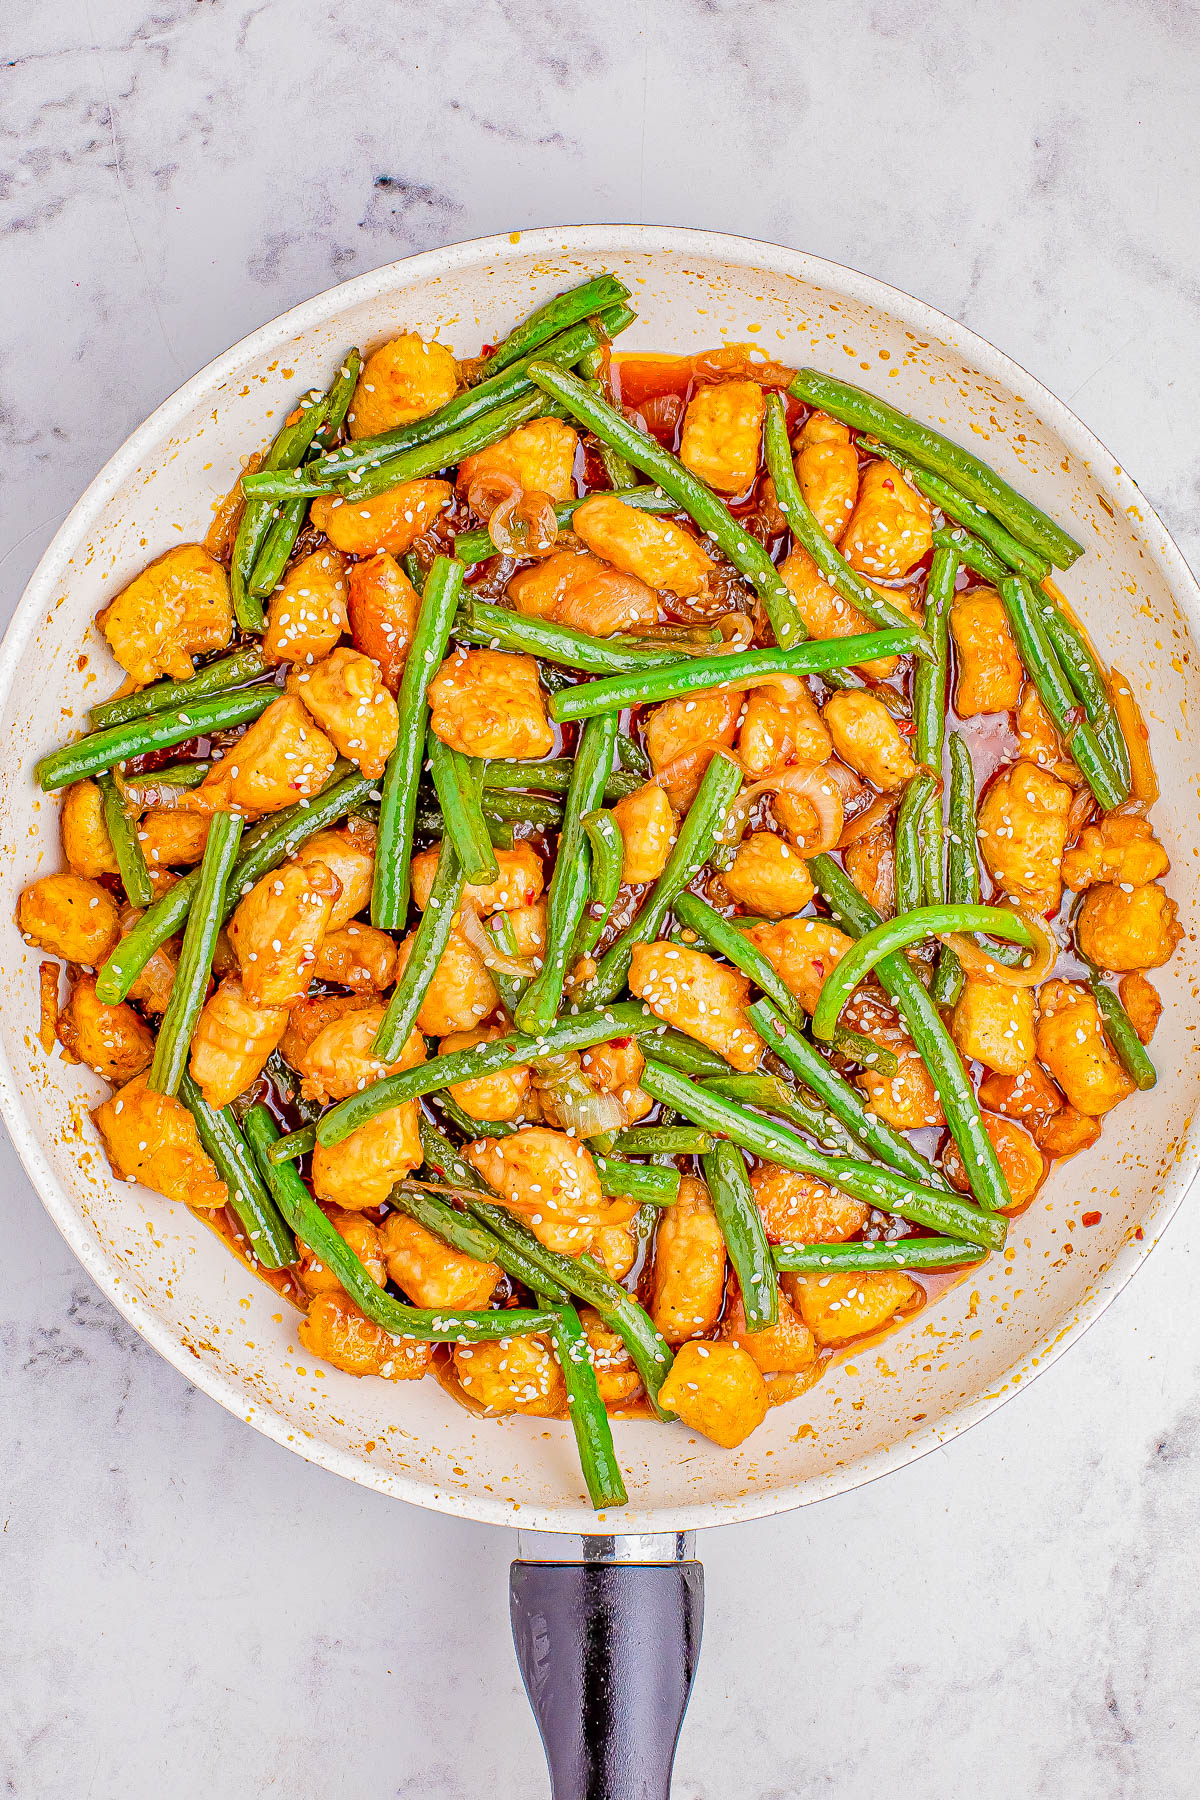 Stir-fried chicken and green beans in a sauce, served in a skillet on a marble surface.